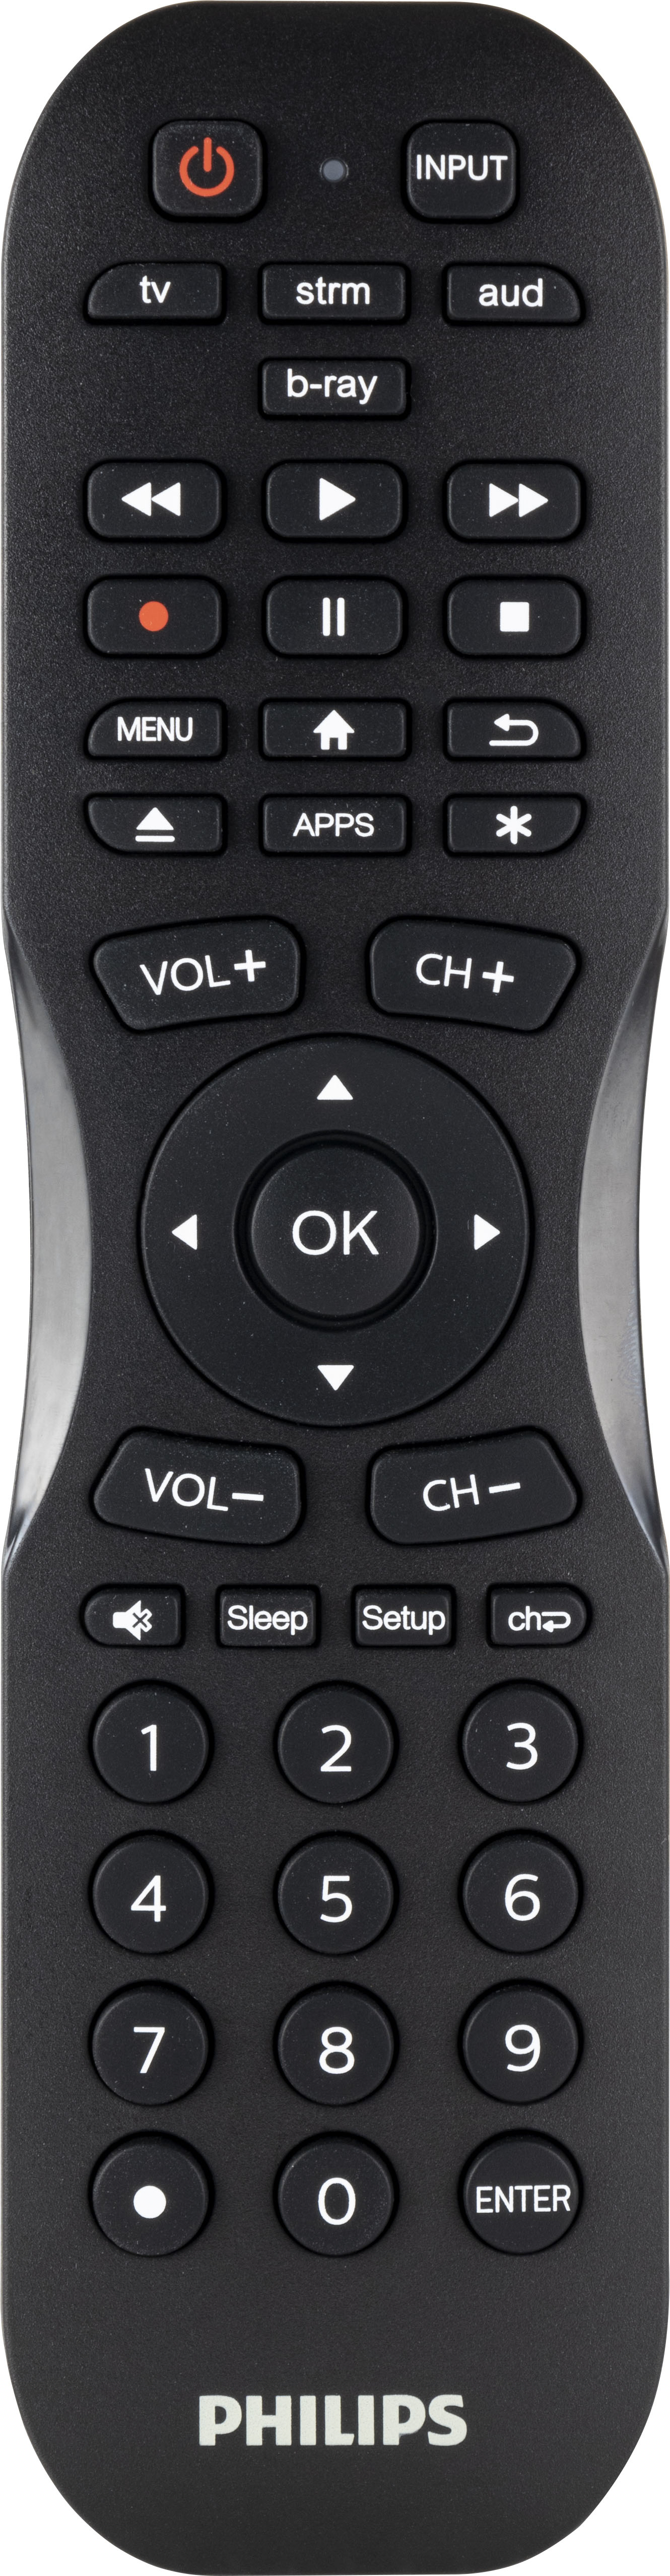 How to Program Philips 3 Device Remote Control using Auto Code Search 